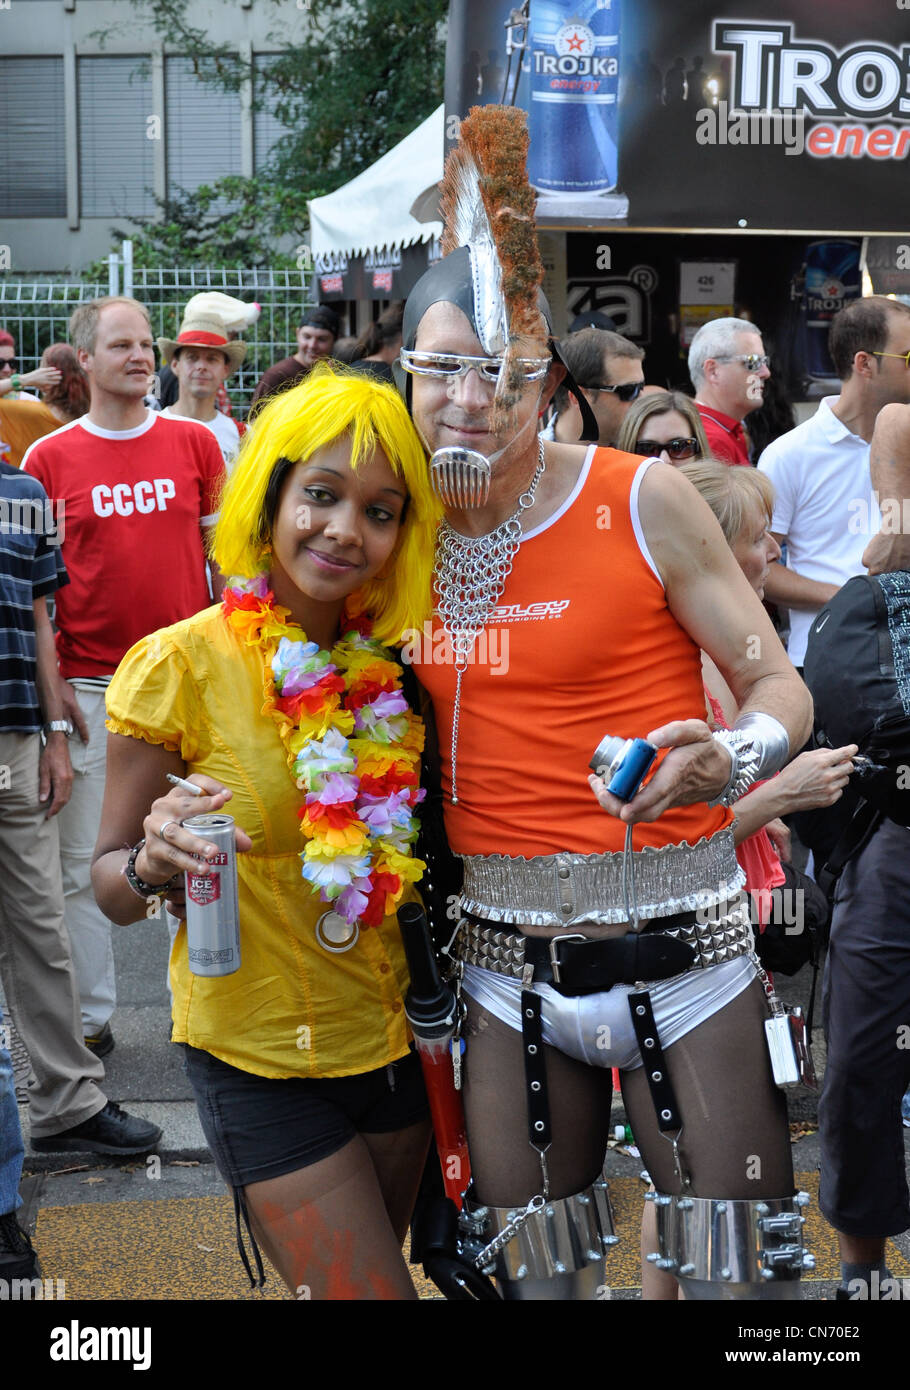 Couple posing during the Street Parade 2011 in Zurich. Photo taken on: August 13rd, 2011 Website: http://www.streetparade.com/ Stock Photo